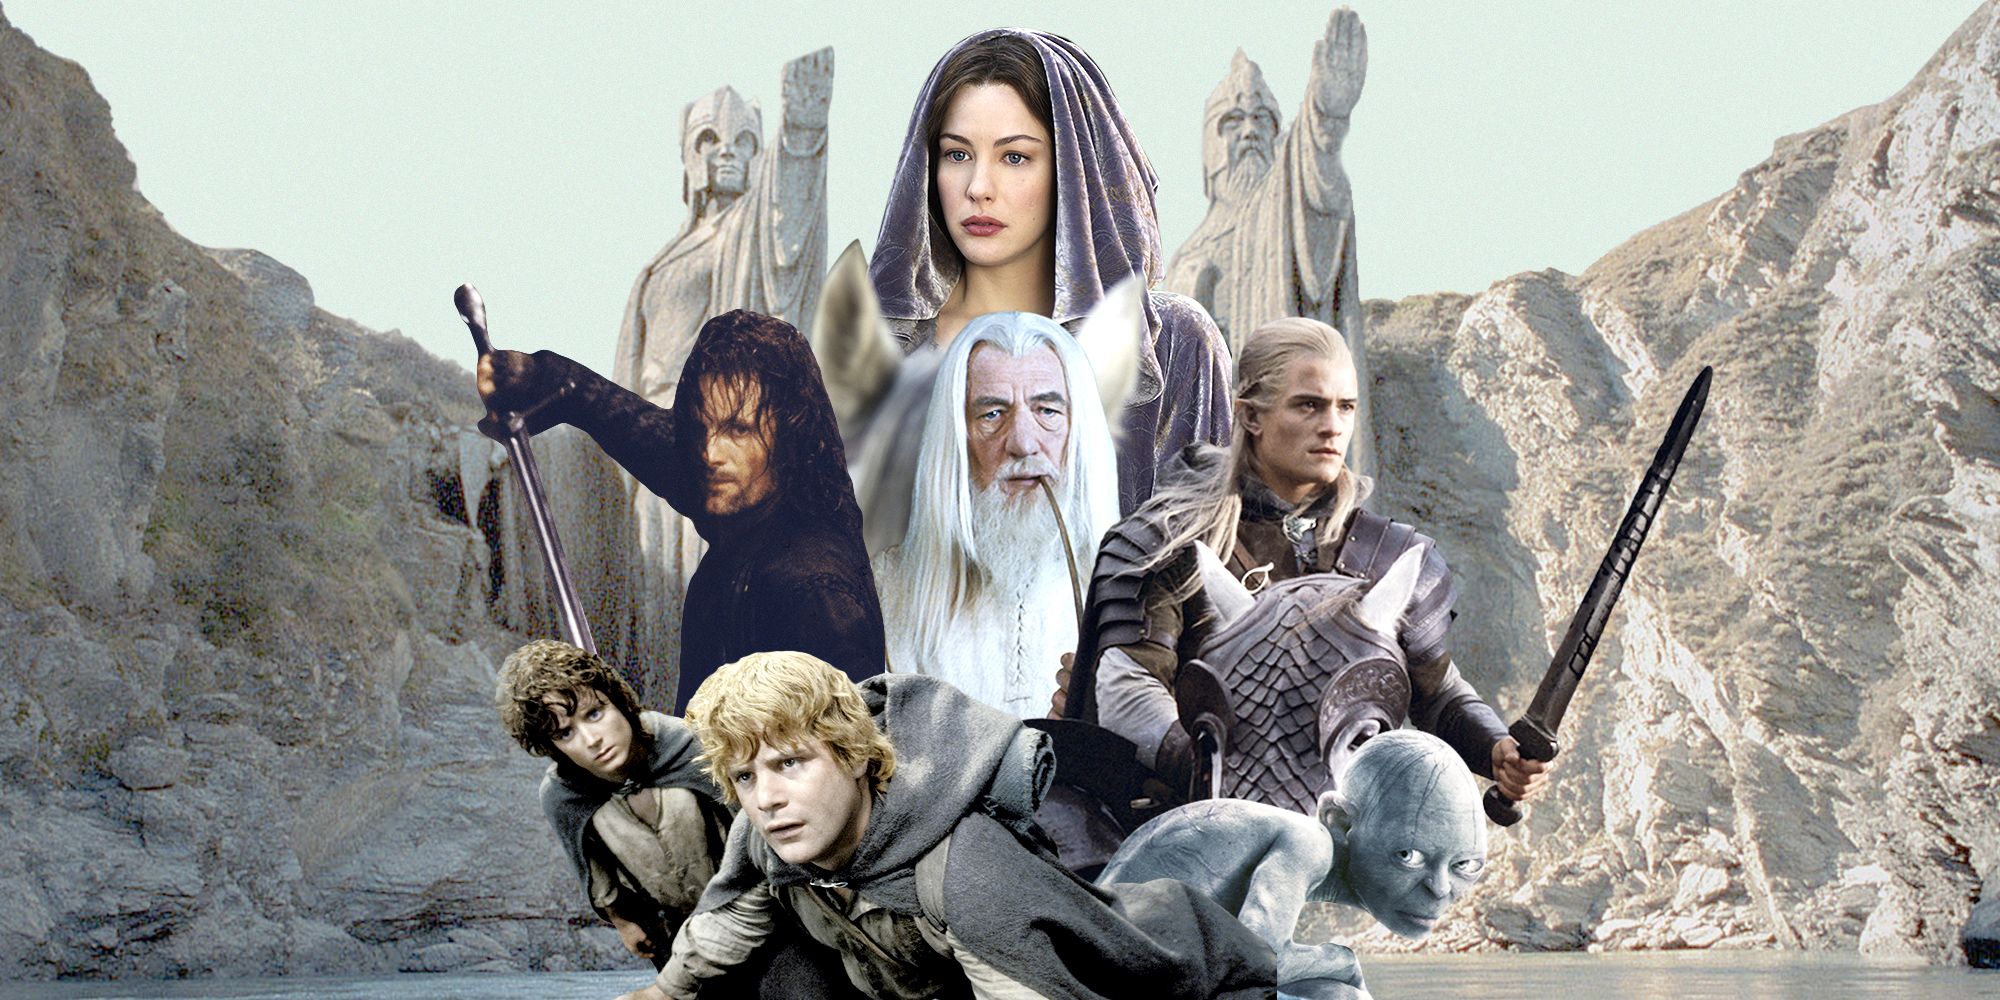 How To Watch All The Lord Of The Rings Movies In Order Where To Stream The Lord Of The Rings And Hobbit Movies